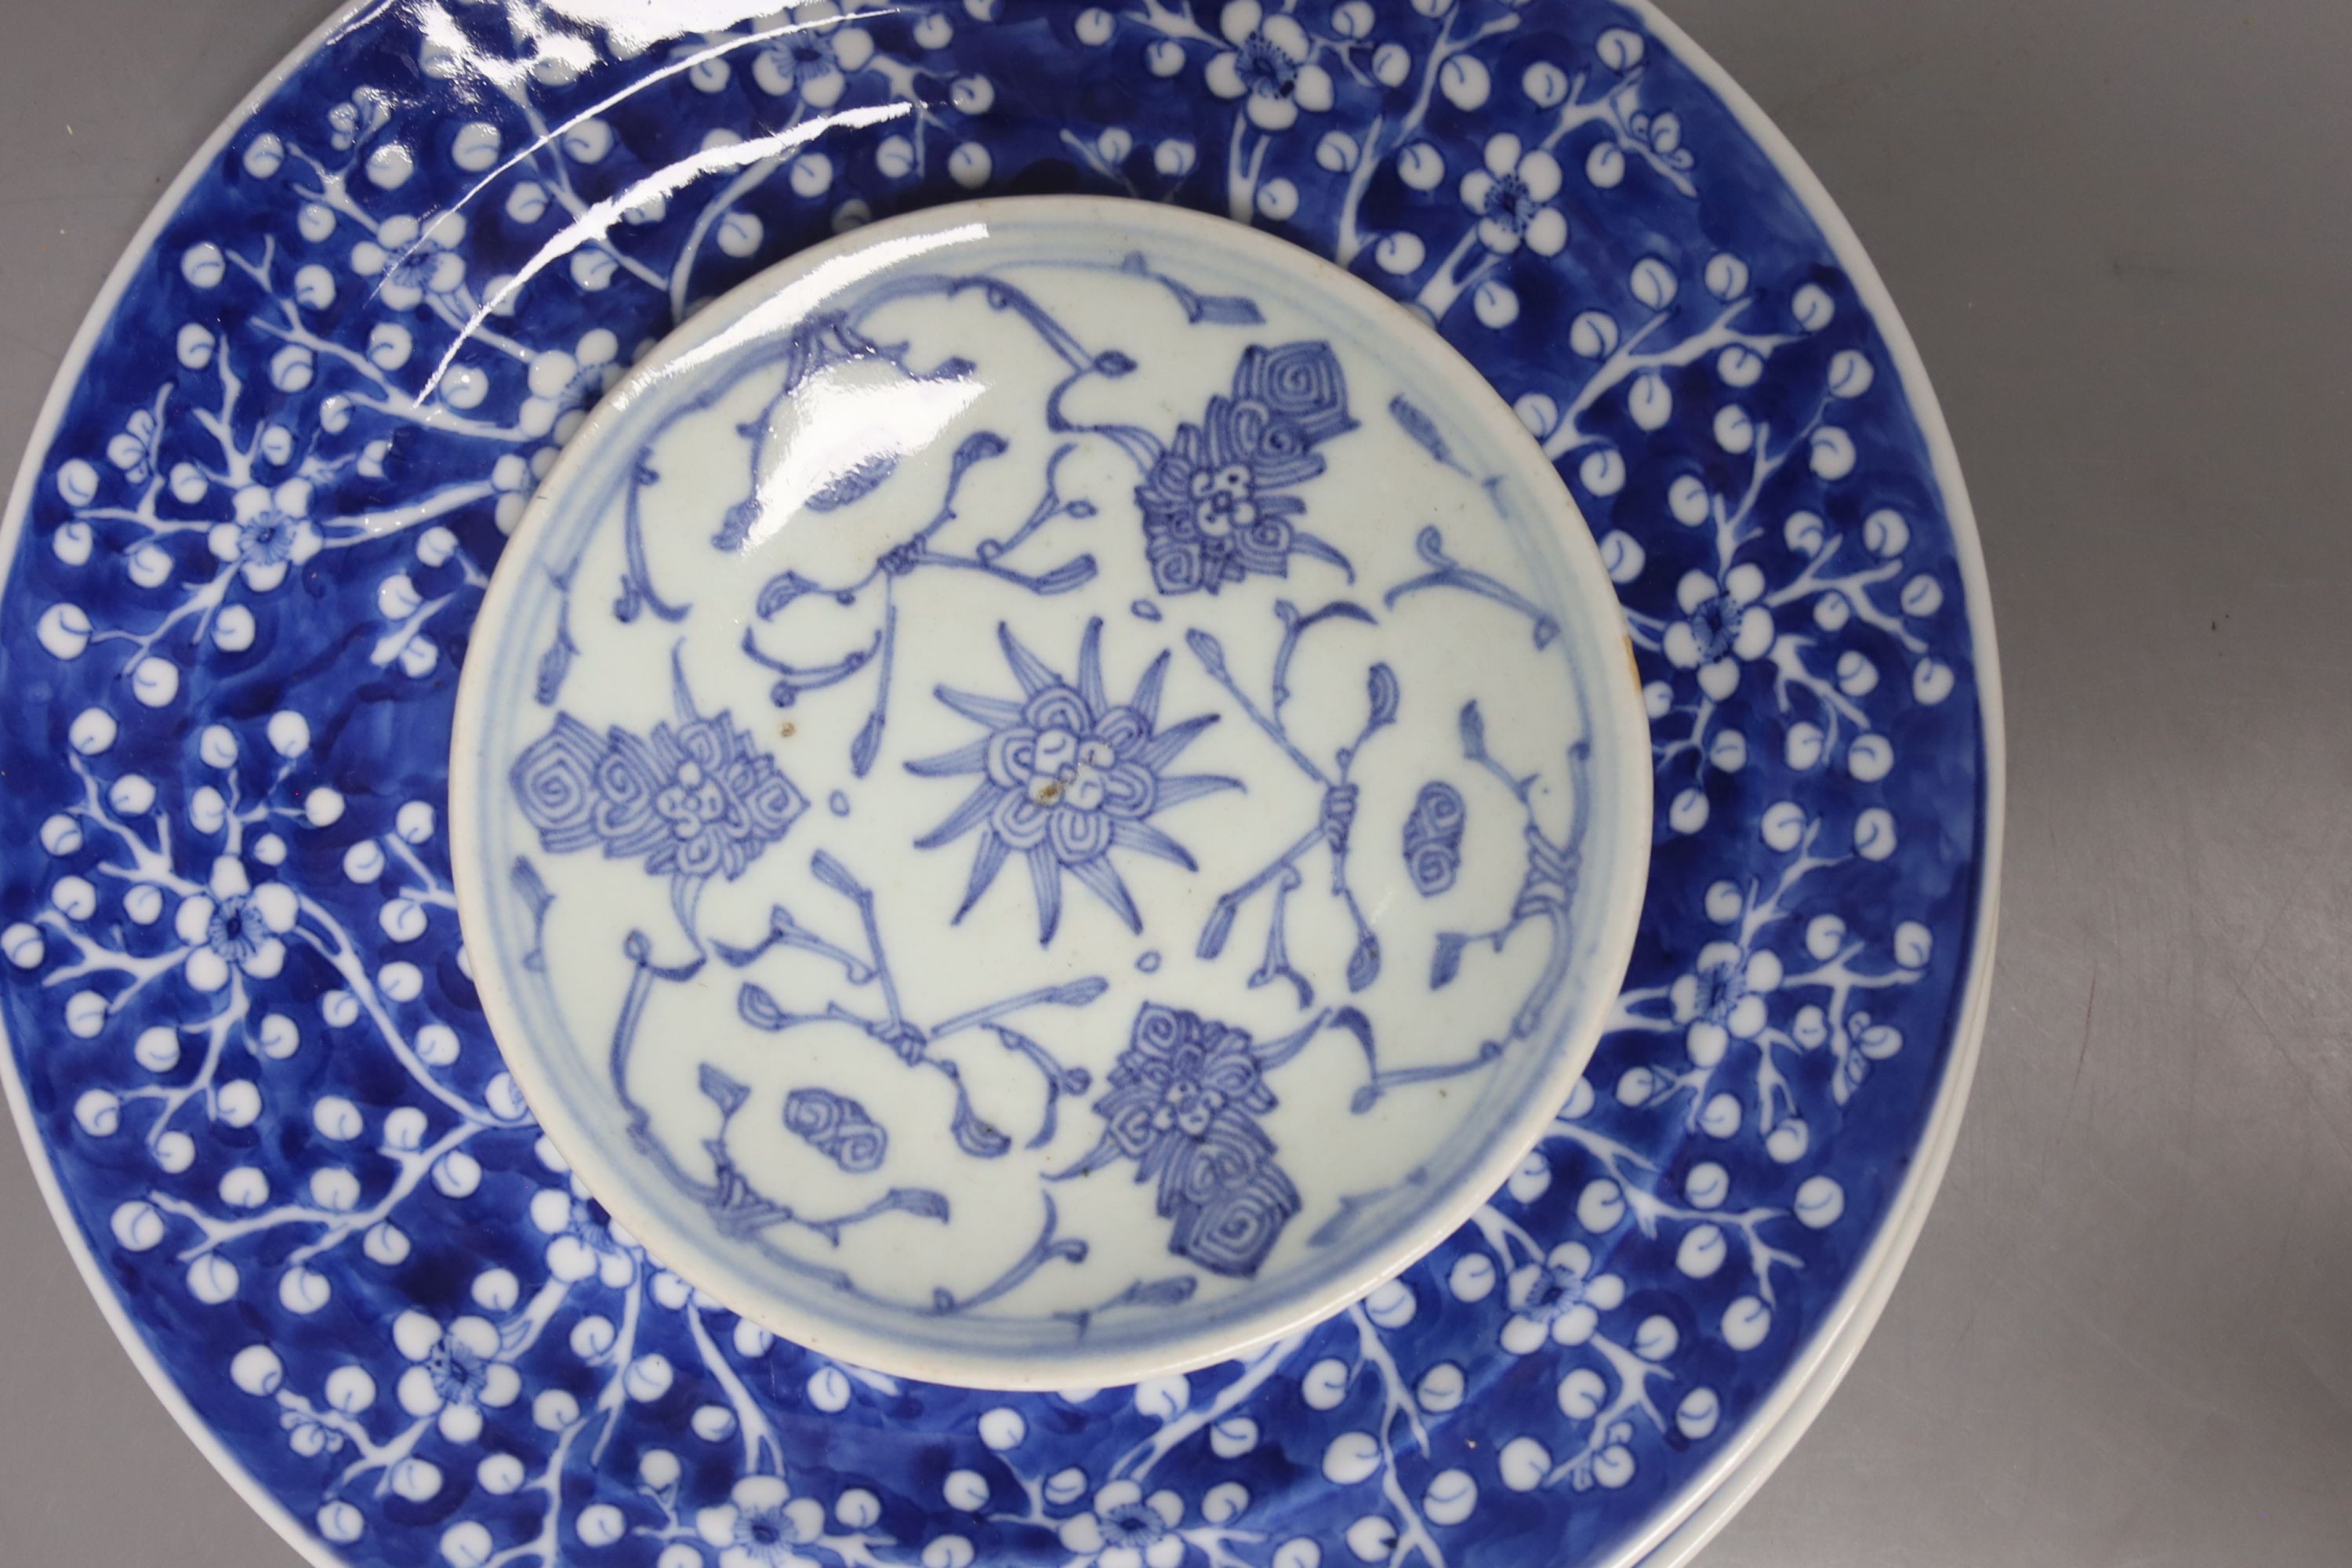 A group of 19th century Chinese blue and white plates, dishes and a cup